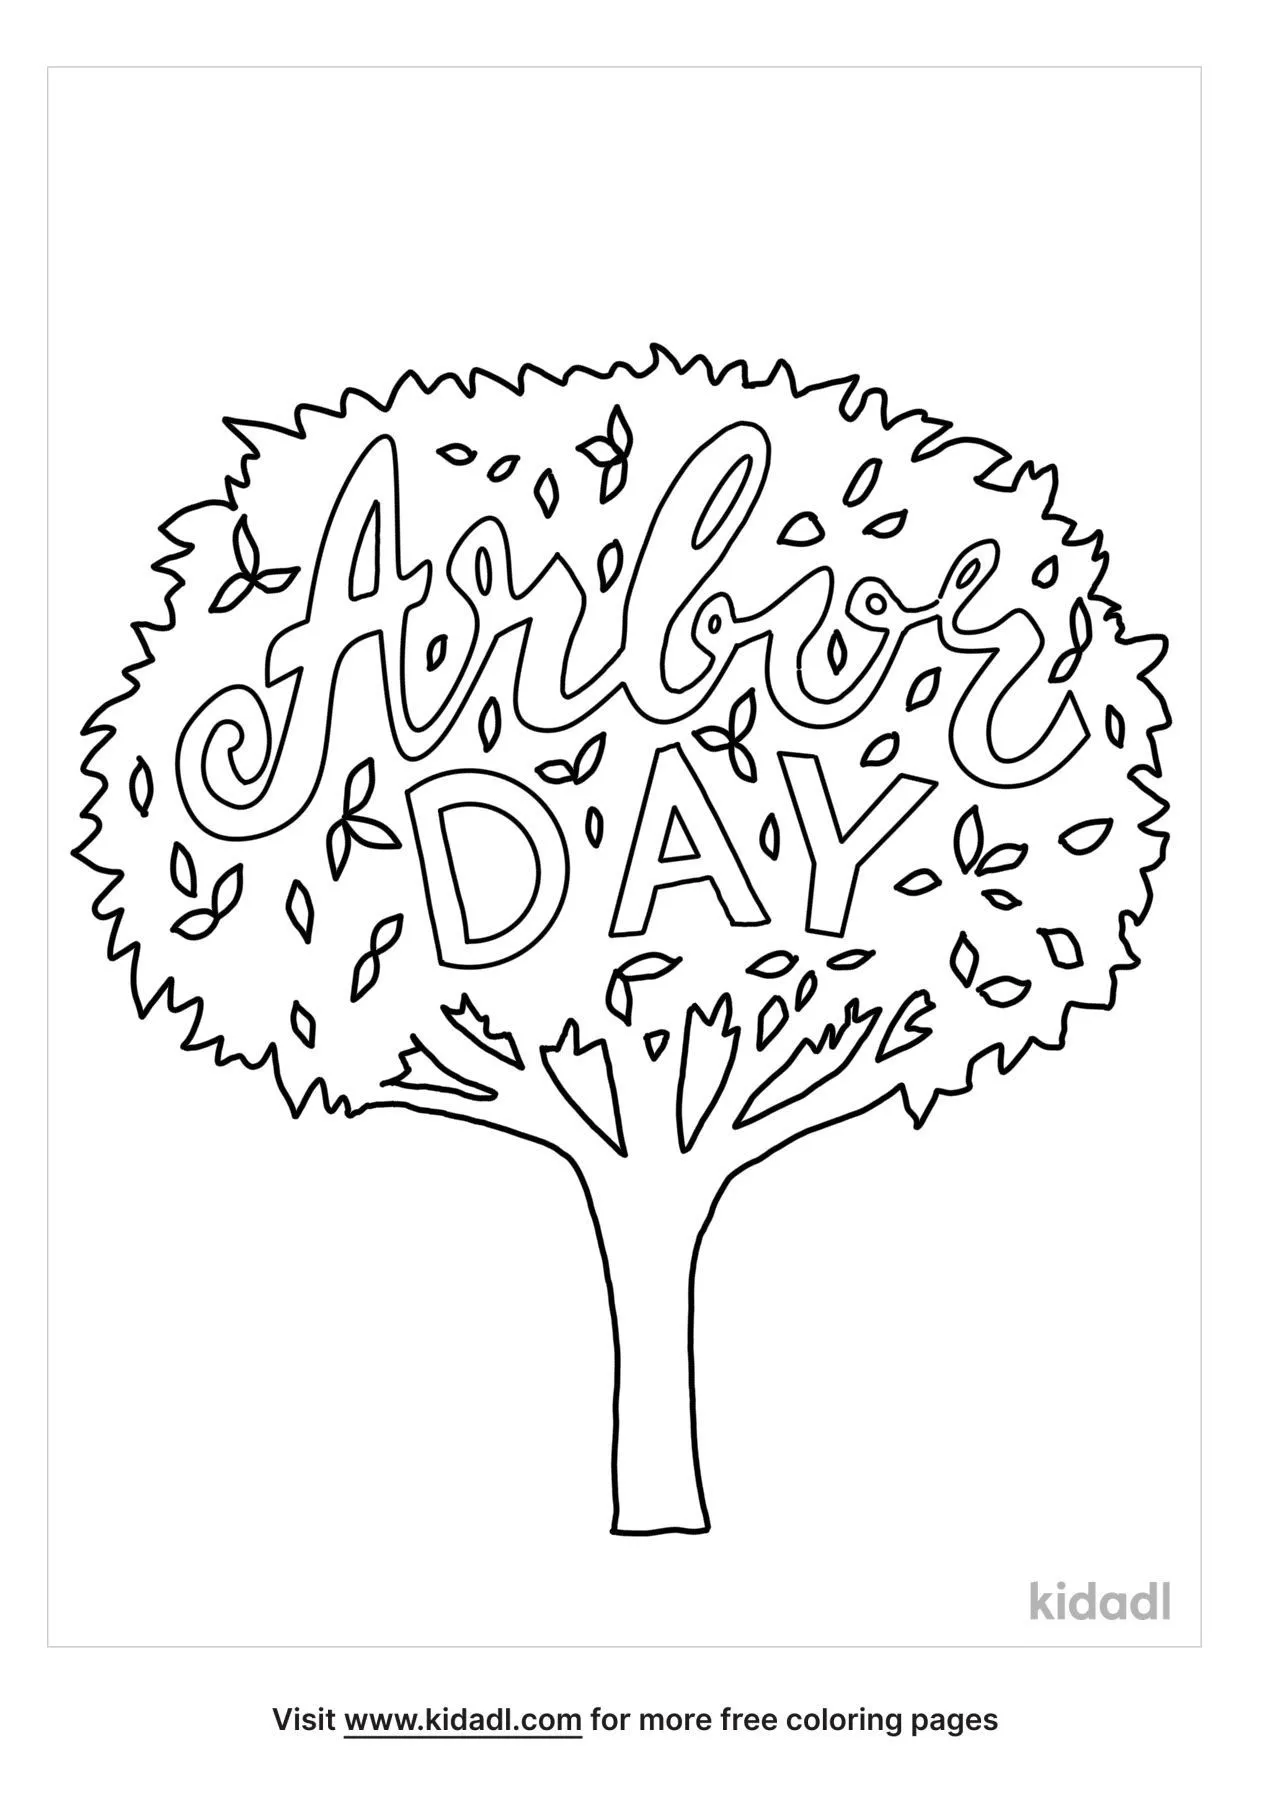 Arbor Day Coloring Page   Free Celebrations occasions Coloring ...